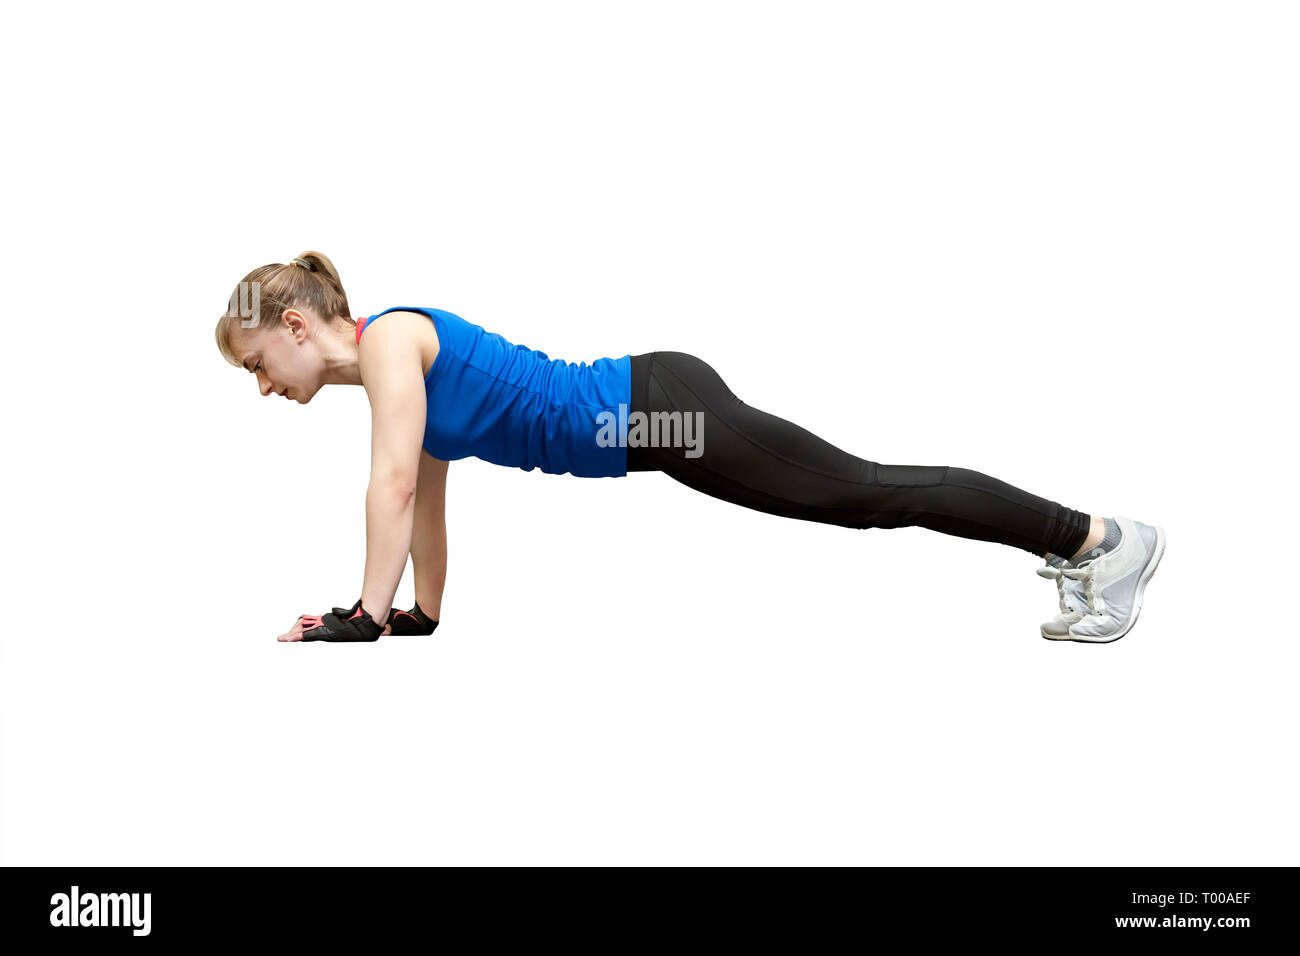 young beautiful woman doing push up exercise isolated on white background. Athlete in a blue shirt and black leggings involved in sports. Stock Photo